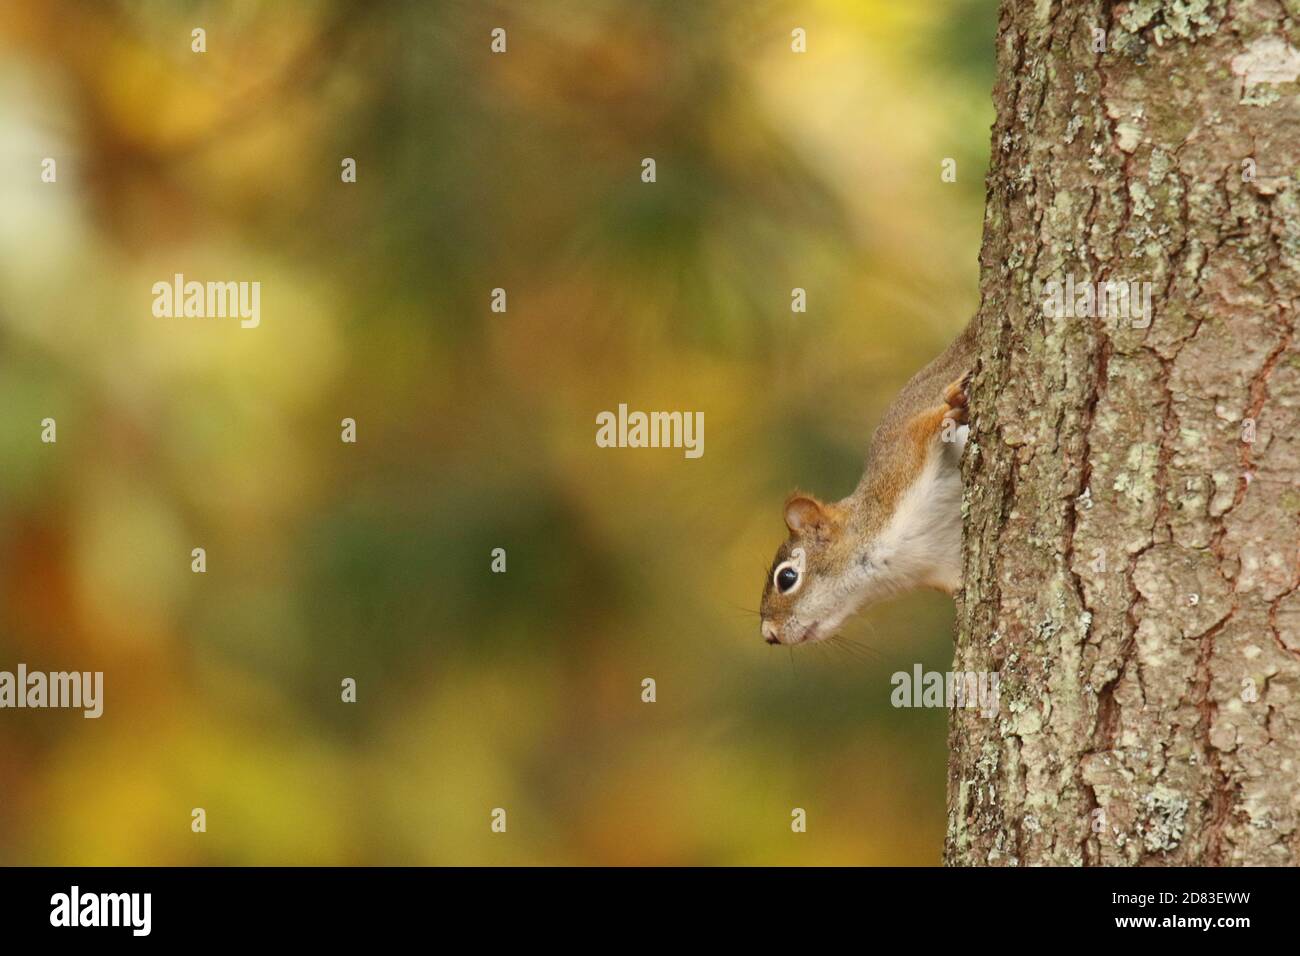 A red squirrel climbing down a tree with a background of Fall leaves Stock Photo